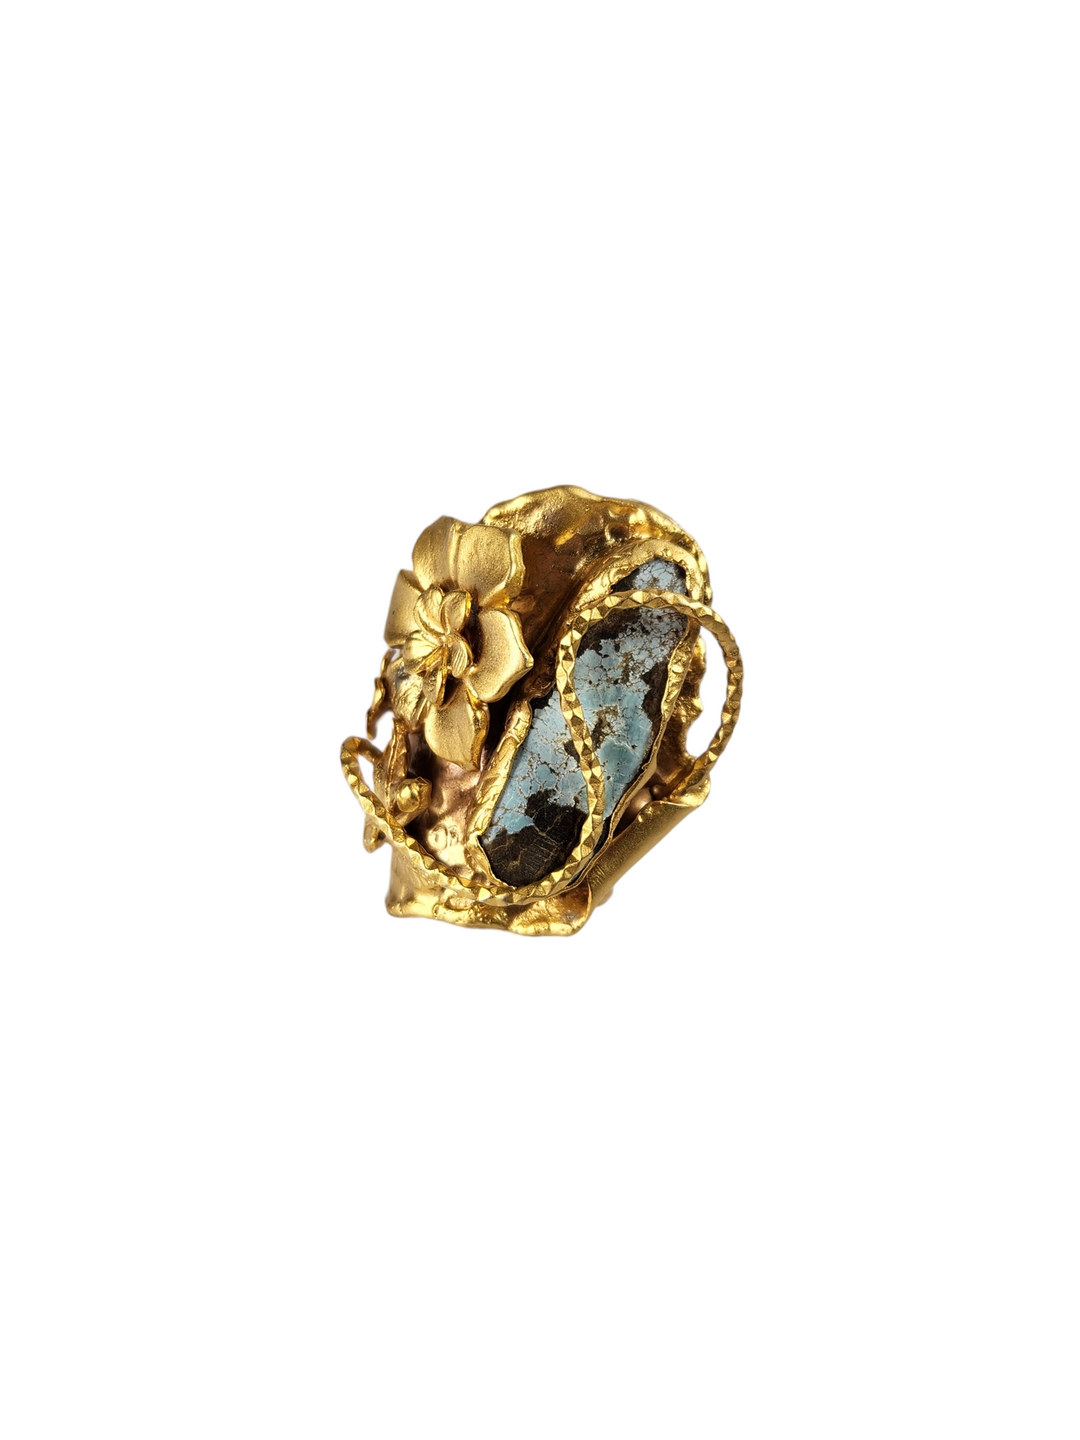 The Turquoise Gold Ring Collection